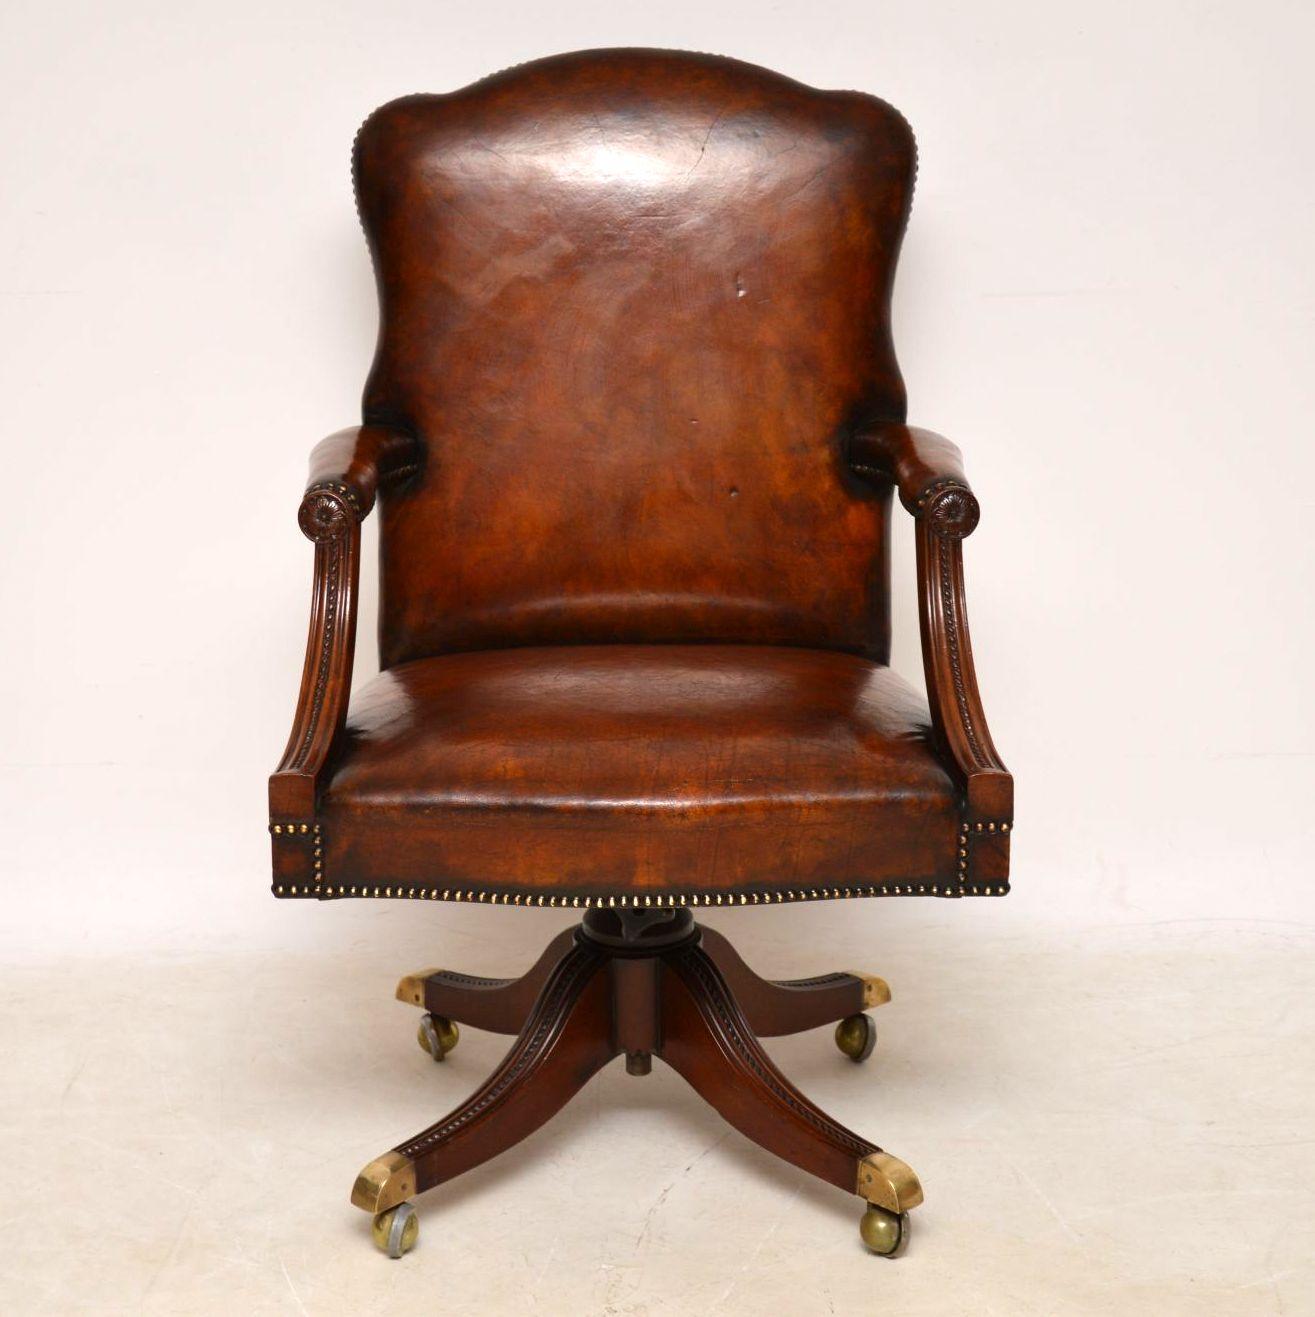 Antique leather and mahogany swivel desk armchair in good condition and of fine quality. The original leather upholstery is still in good condition and has a lovely color with plenty of character and is all hand tacked onto the frame. The mahogany